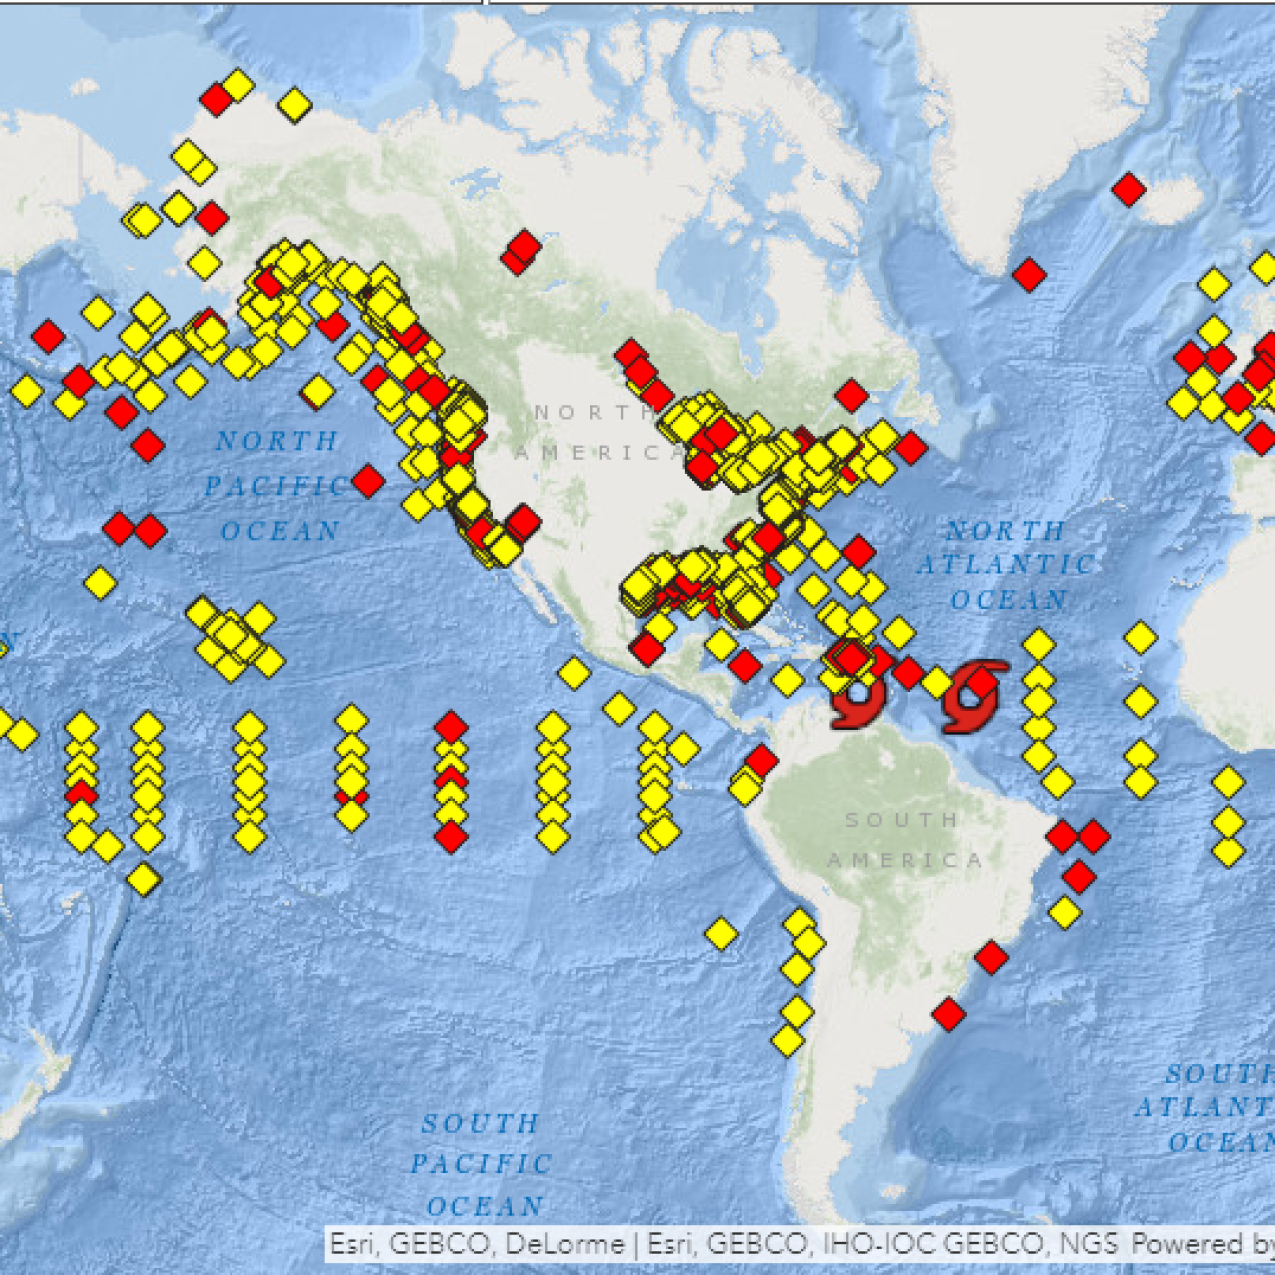 An international map showing the locations of buoys in the Atlantic Ocean, the Pacific Ocean, and some in inland waterways.